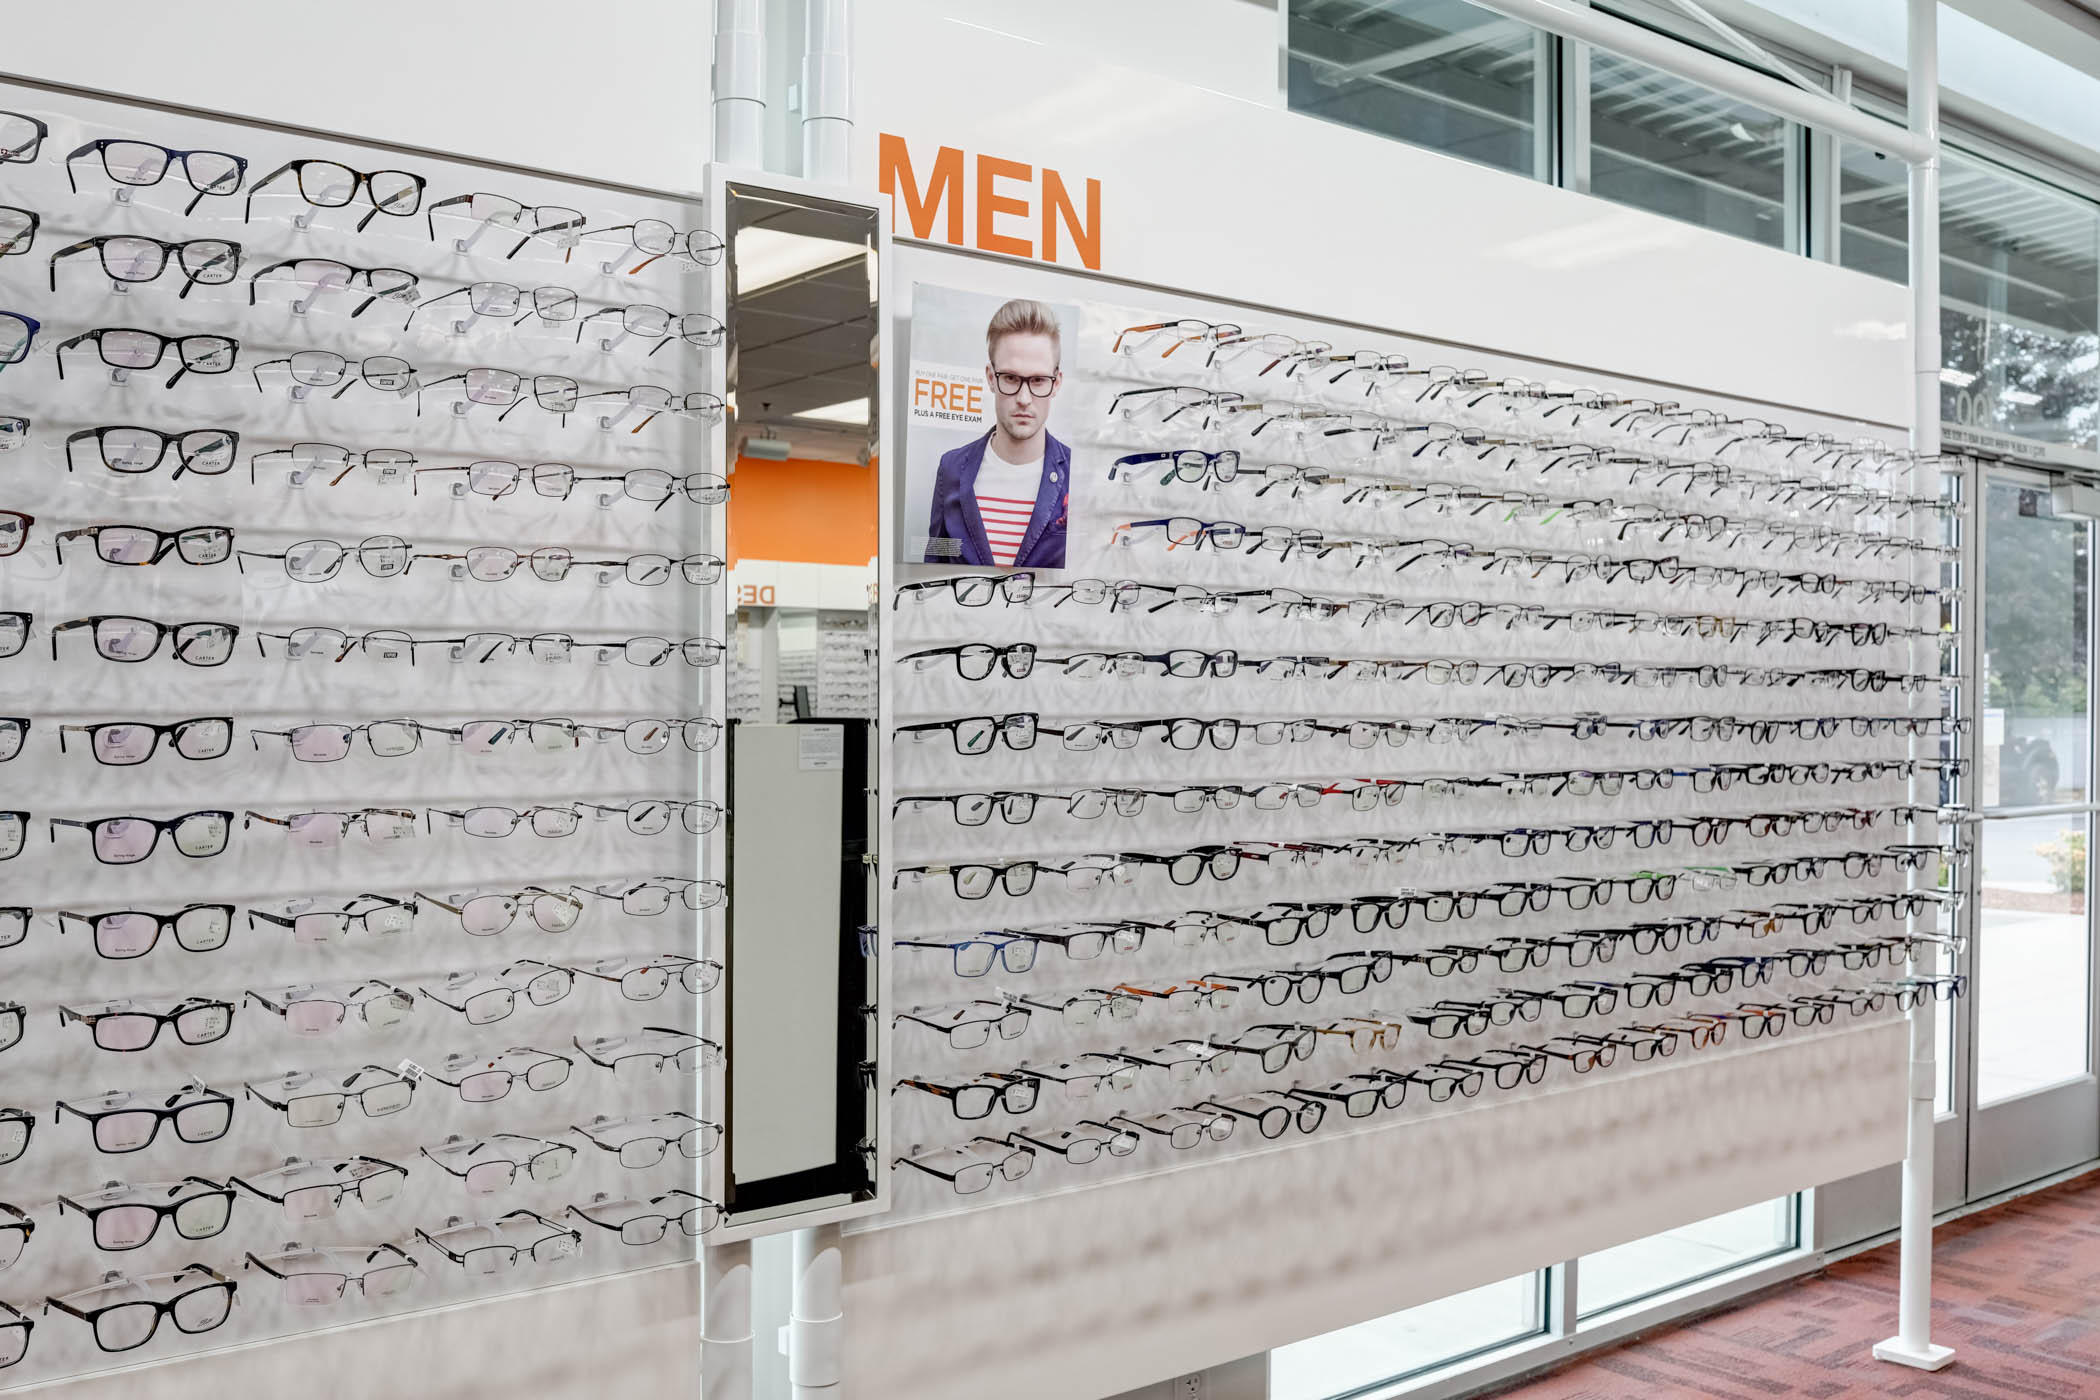 Eyeglasses for sale at Stanton Optical store in Portland, OR 97223